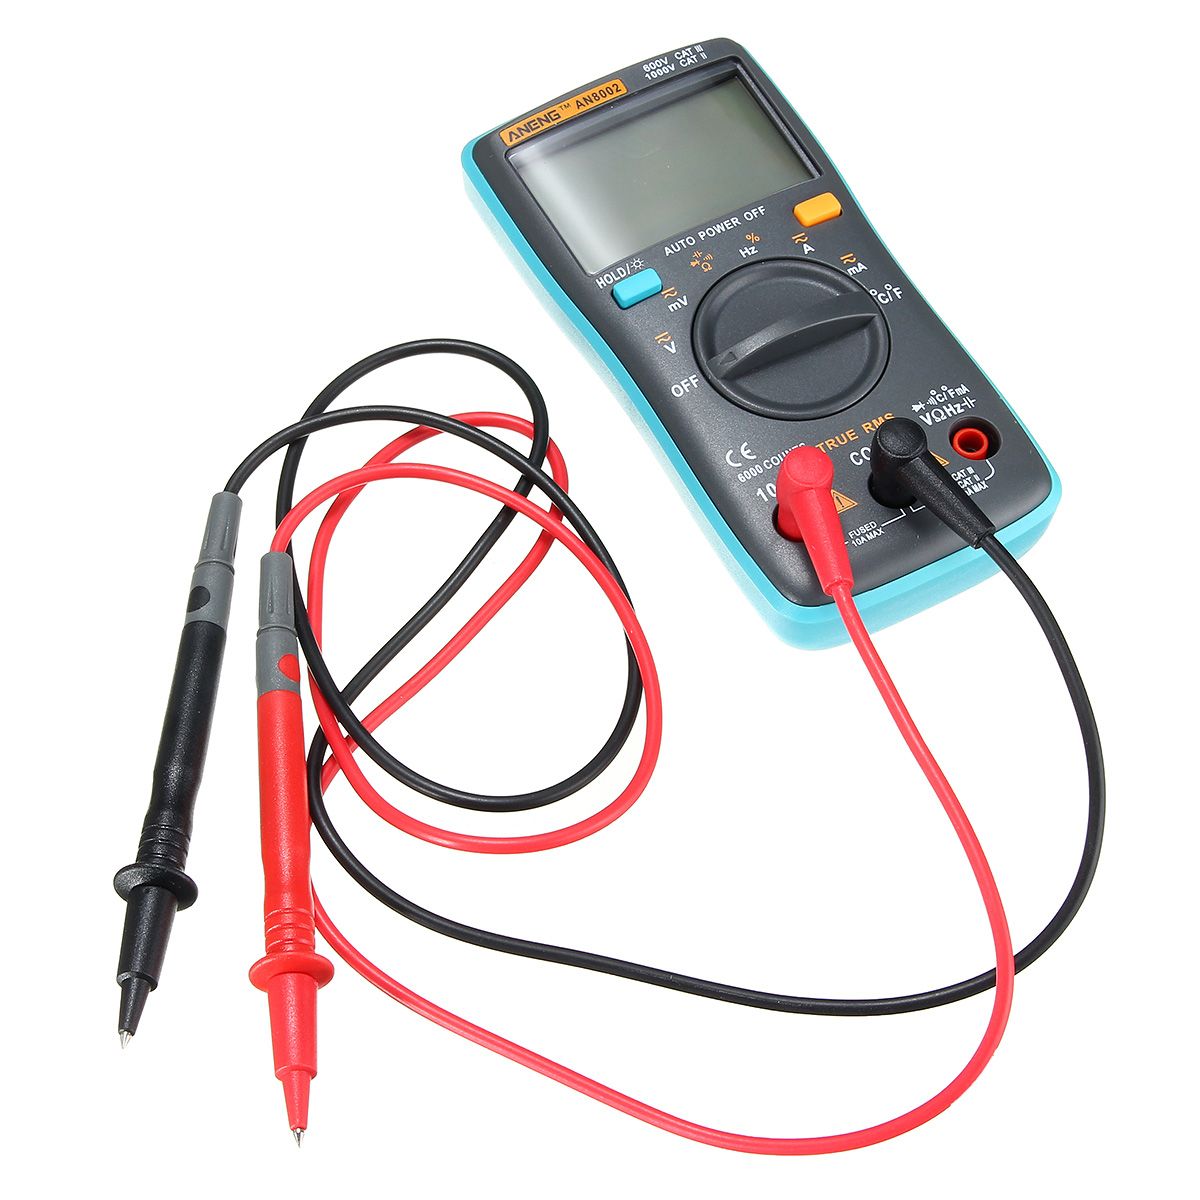 ANENG-AN8002-Digital-True-RMS-6000-Counts-Multimeter-ACDC-Current-Voltage-Frequency-Resistance-Tempe-1145700